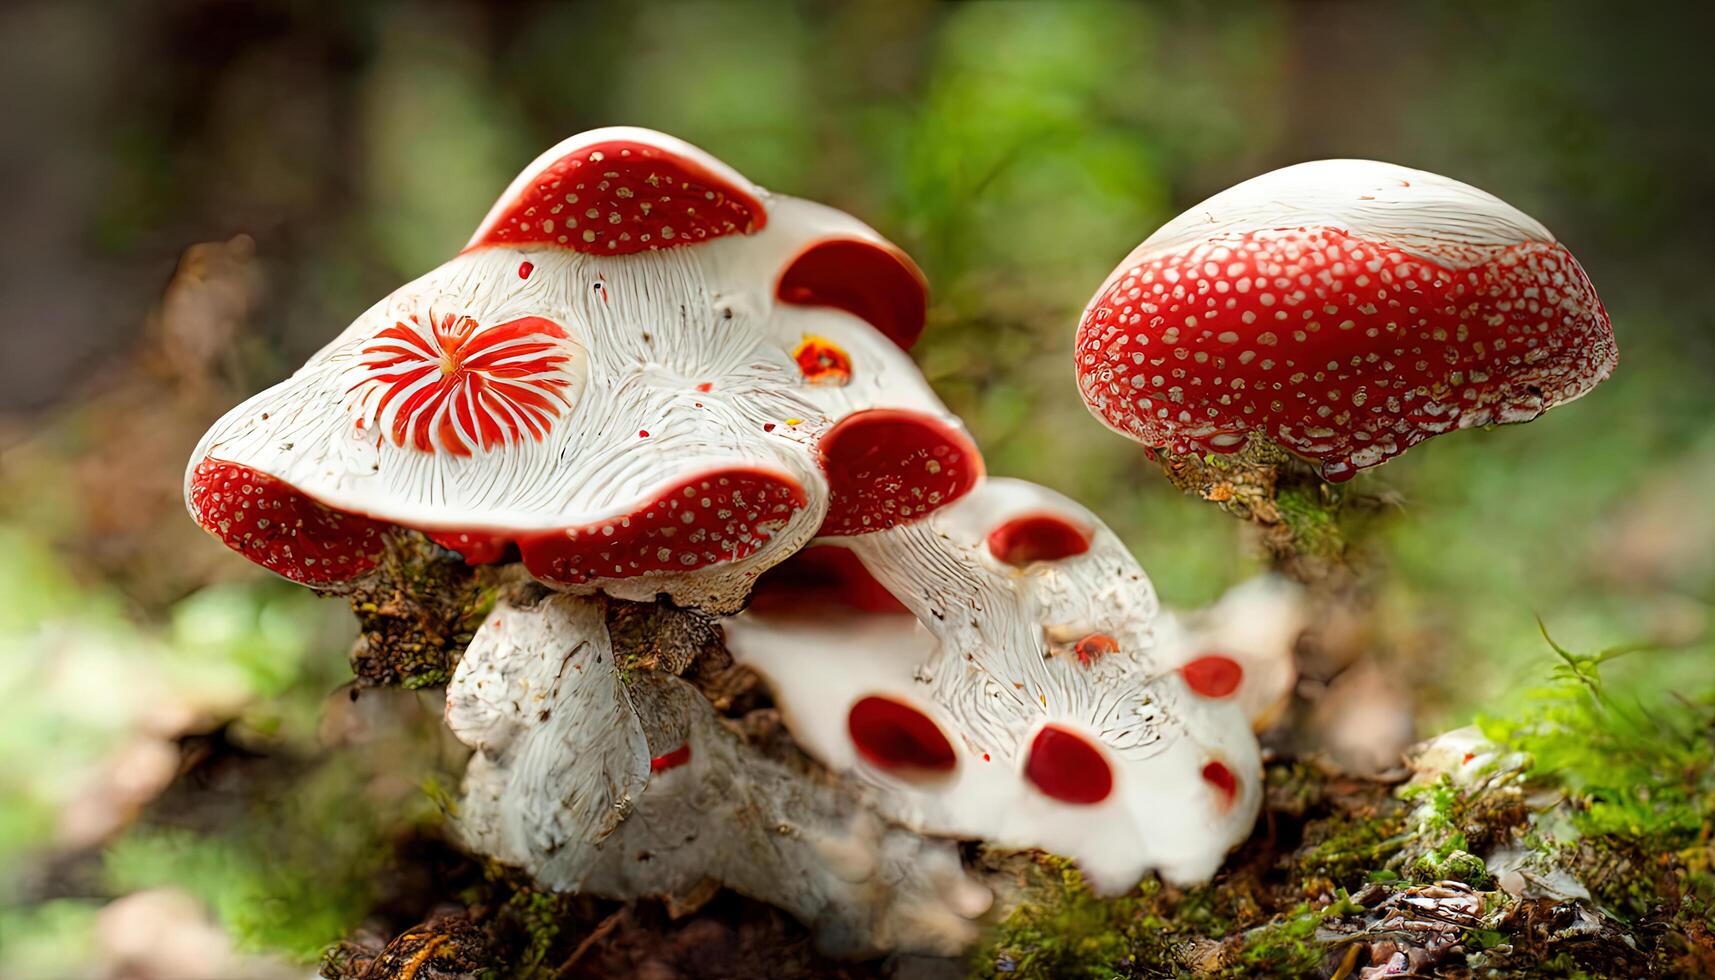 Red Cap mushroom psychedelic poisonous mushroom vibrant red with white spots. photo